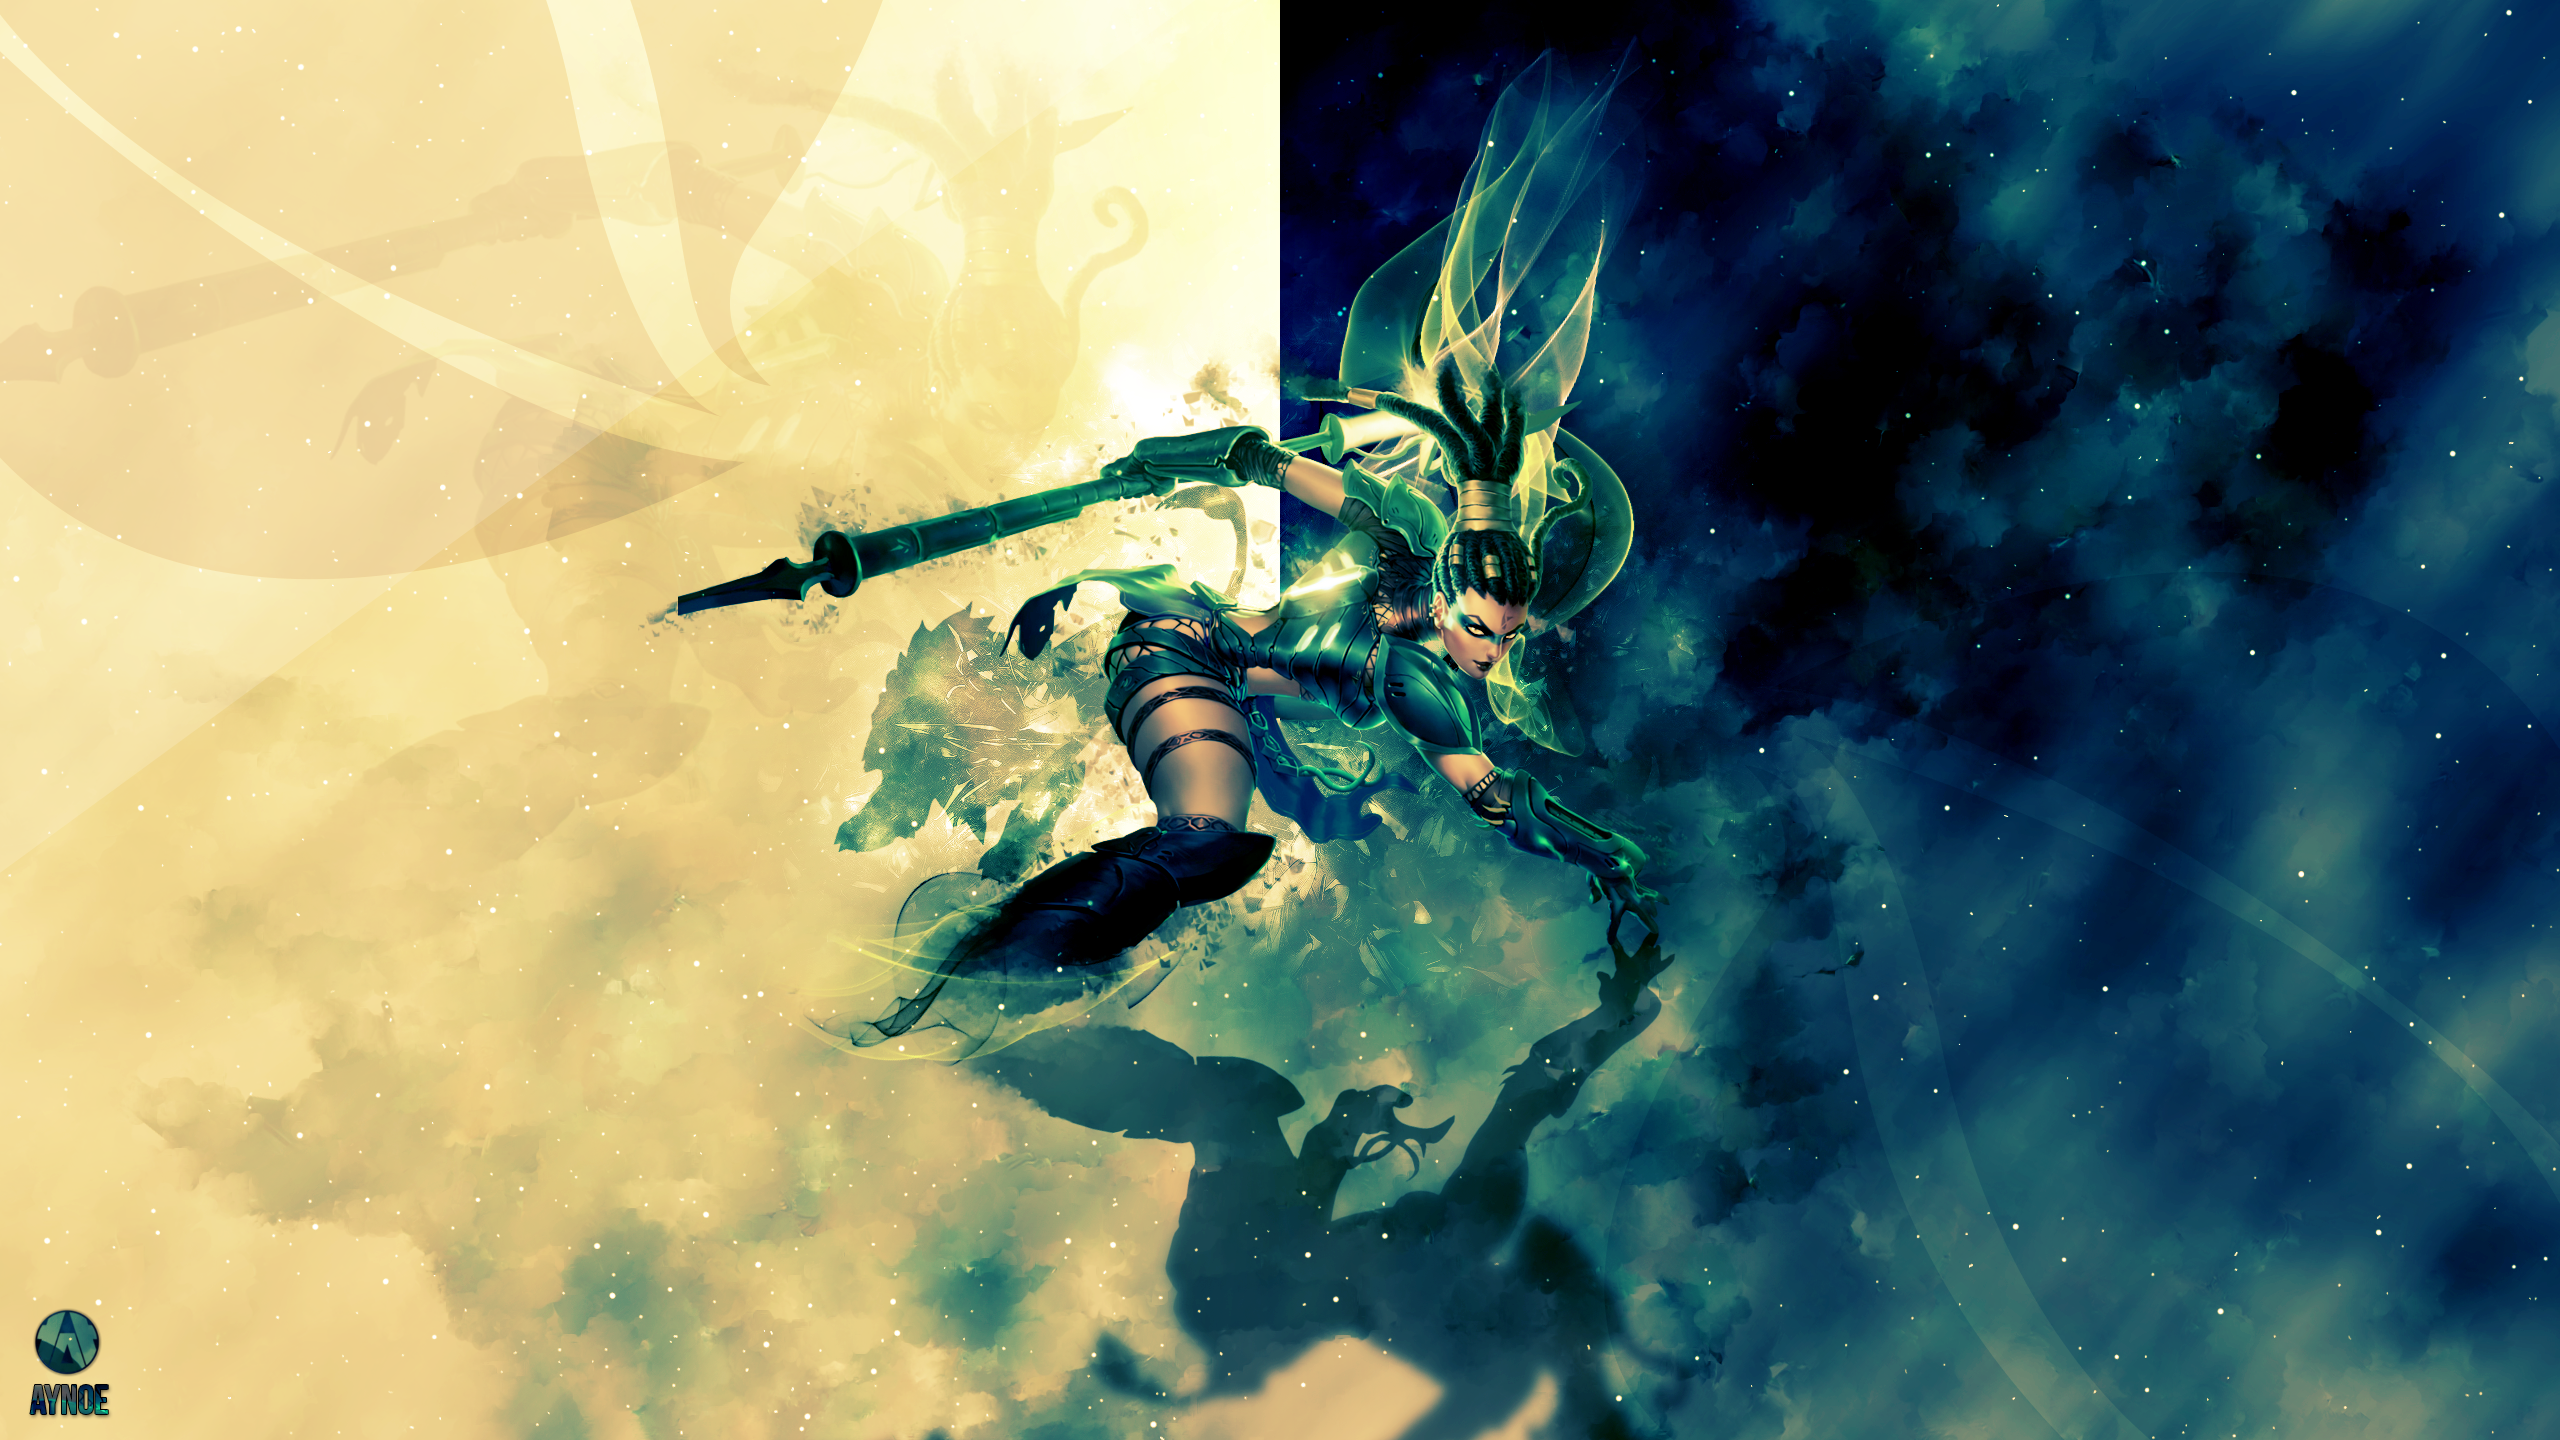 General 2560x1440 PC gaming video game girls video game art League of Legends